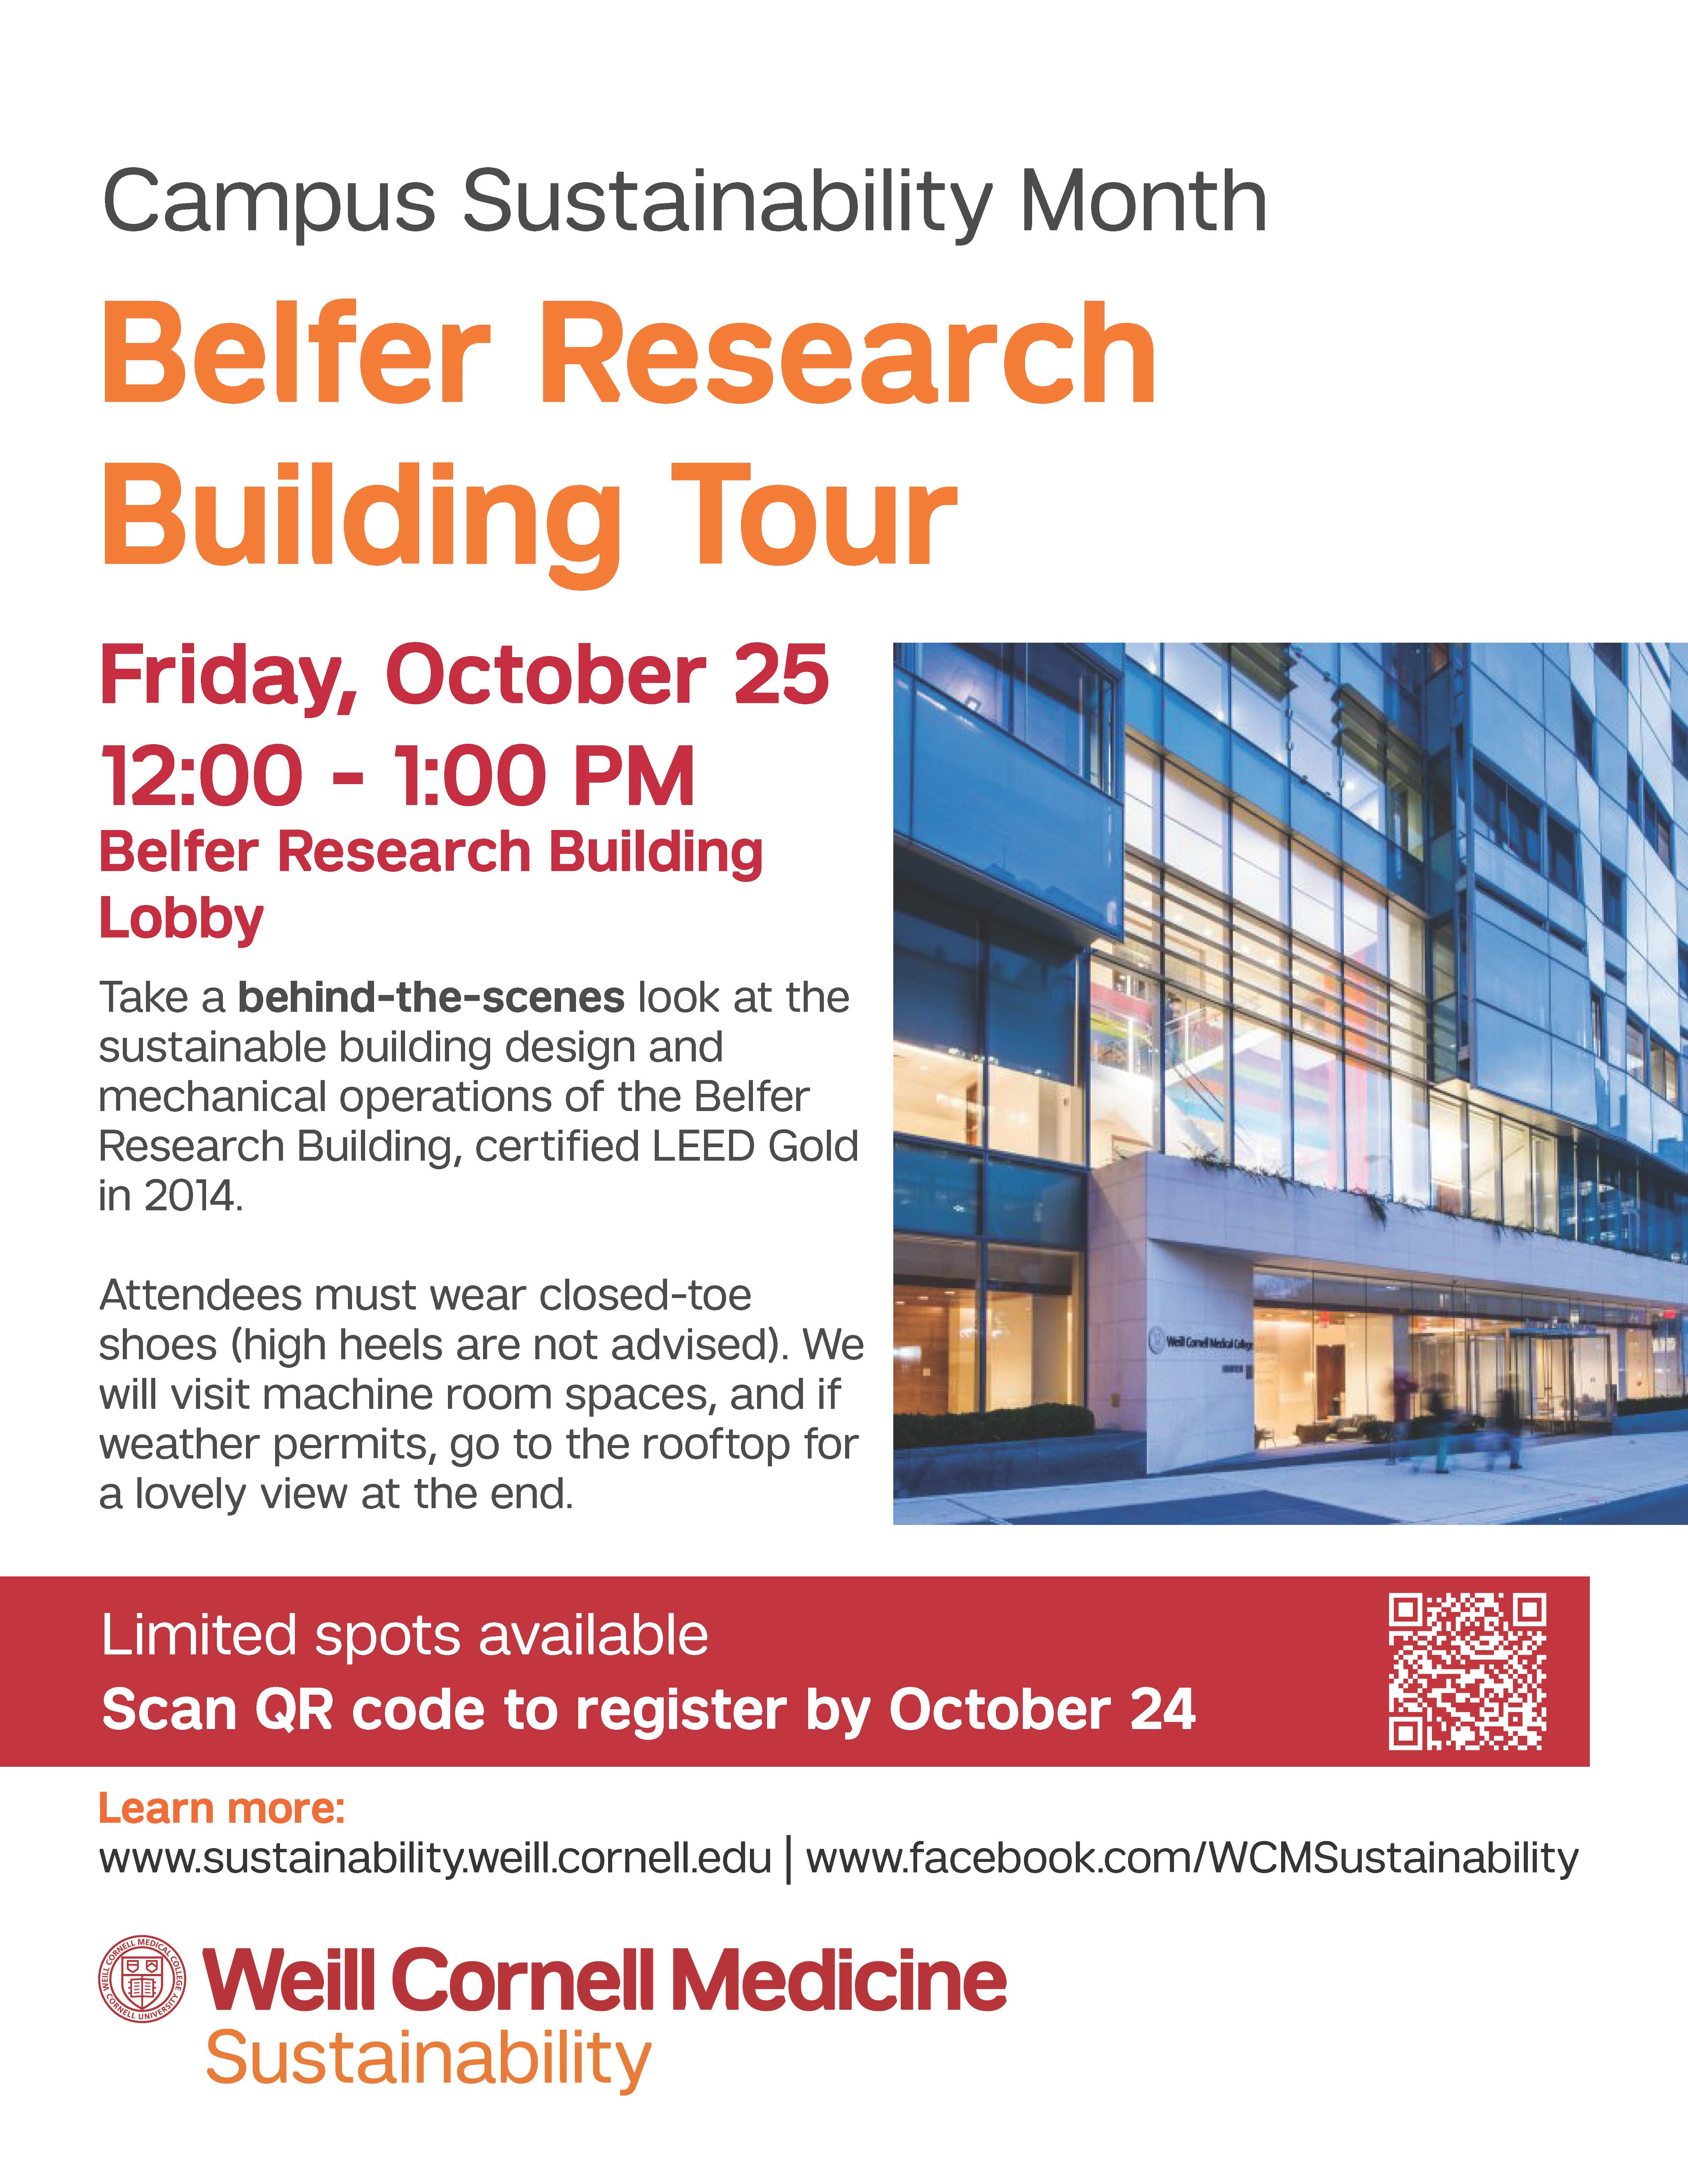 Belfer Research Building Tour Poster